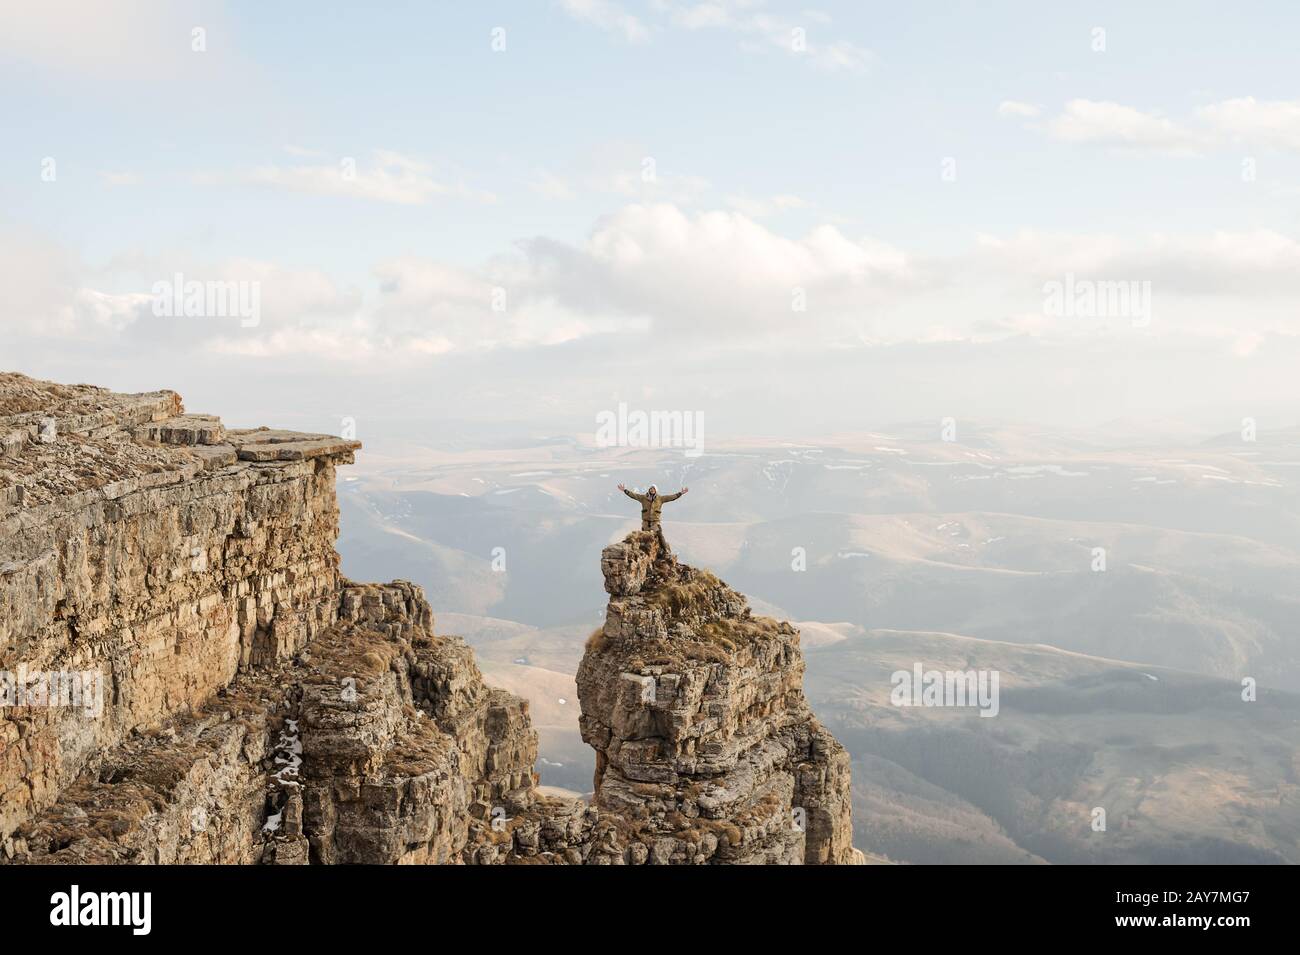 A happy man with his hands up high stands on top of a separately standing rock that is above the clouds against the background o Stock Photo